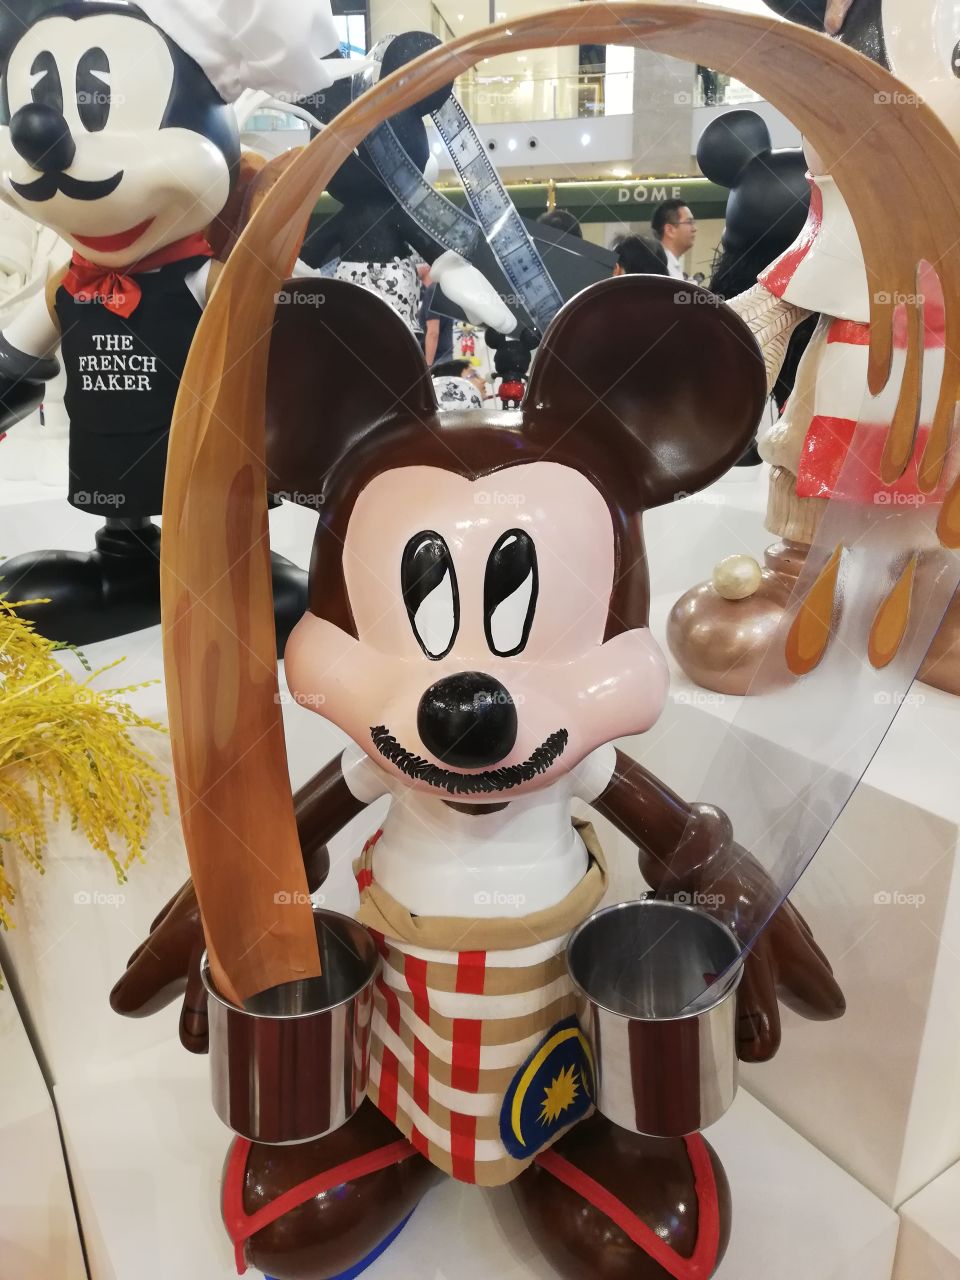 Concept of mickey mouse adapted to local dish brought over with creativity